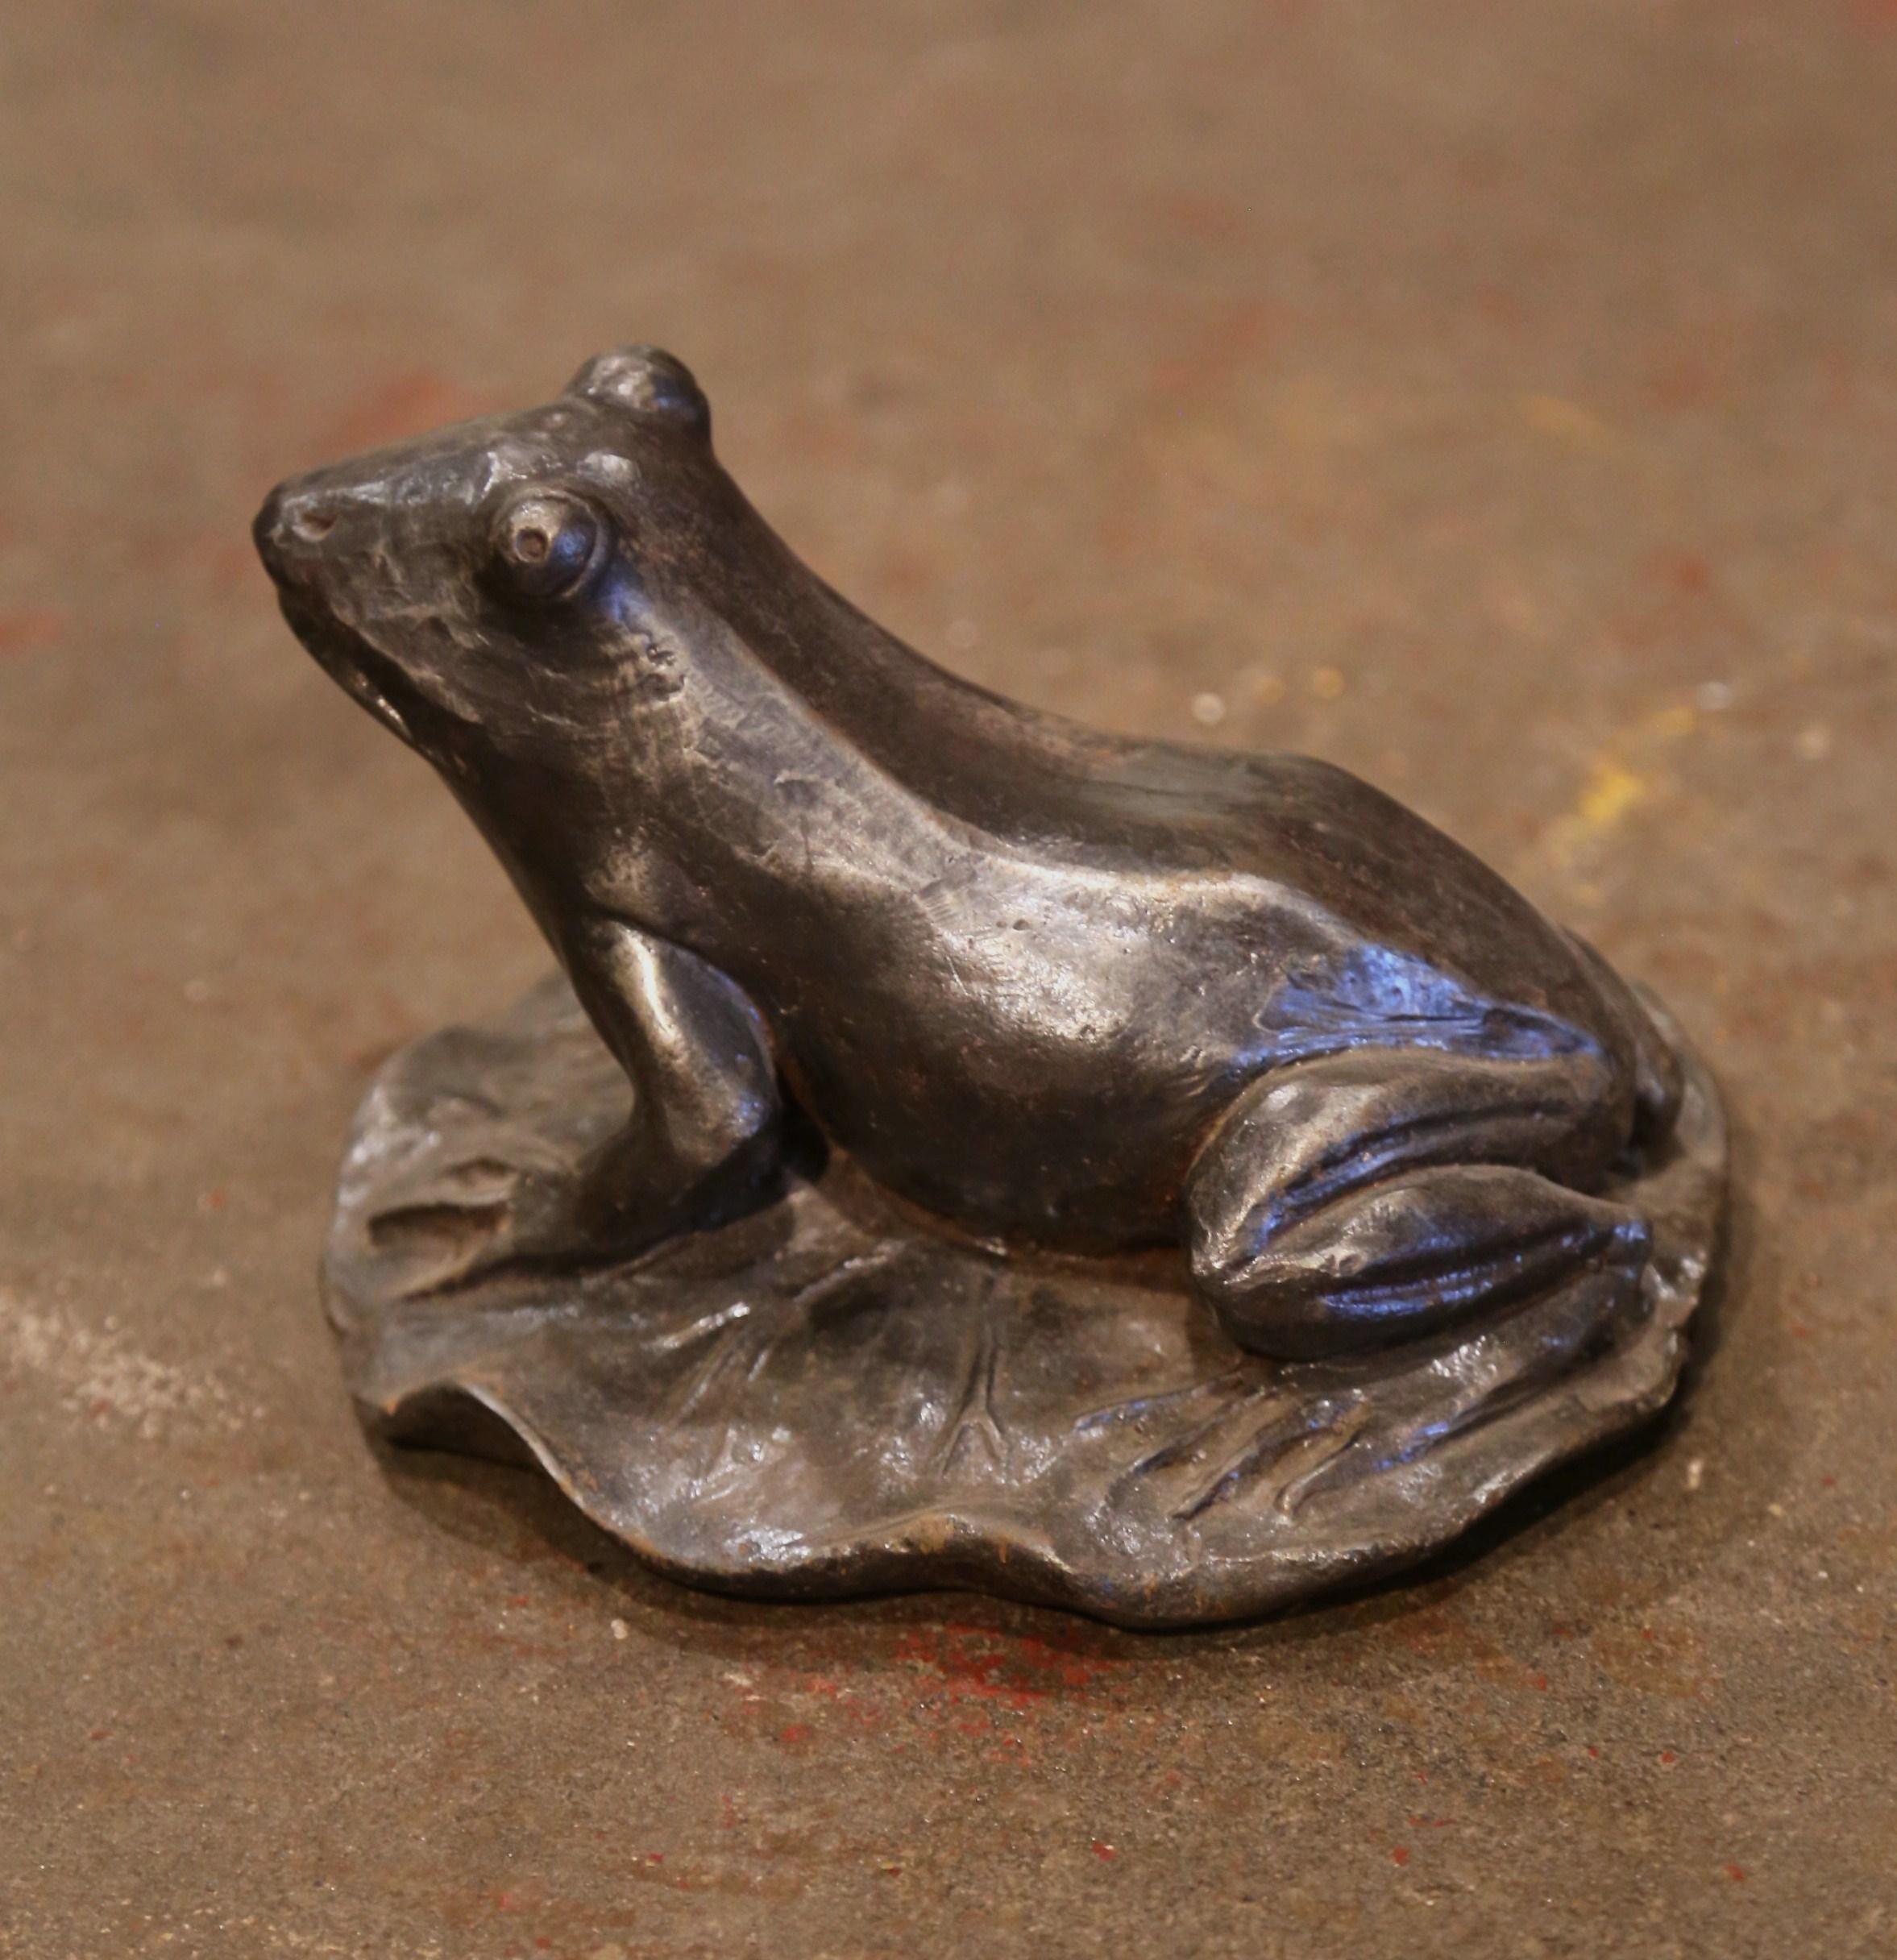 Crafted in France circa 1930, the sculpture depicts a frog resting on his back legs on a lily leaf. The frog is in excellent condition and adorns a rich polished silver and black steel finish. Use it outside to decorate a back yard or a